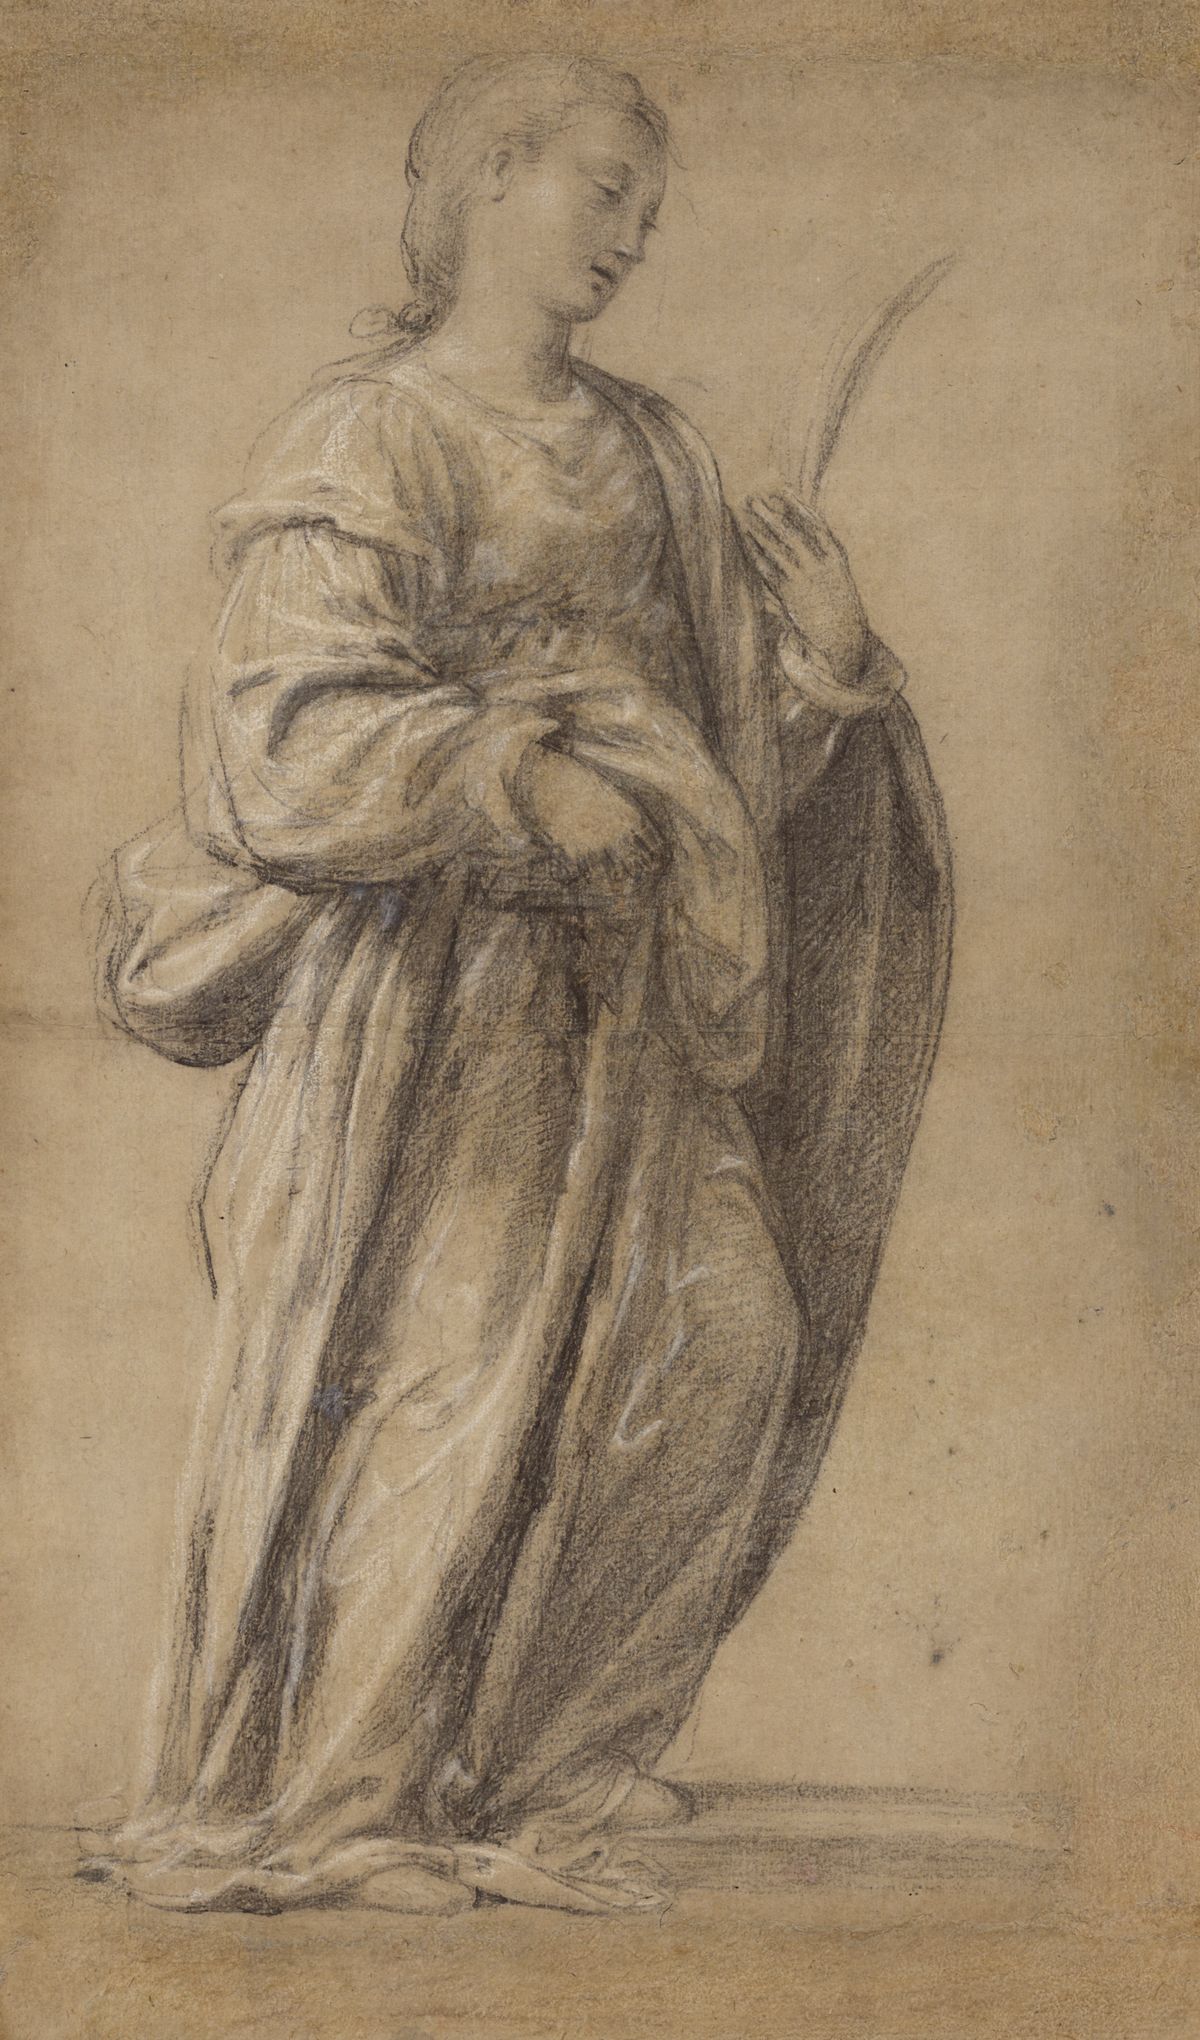 Saint Lucy by Fra Paolino (1525-1530) - Public Domain Catholic Drawing